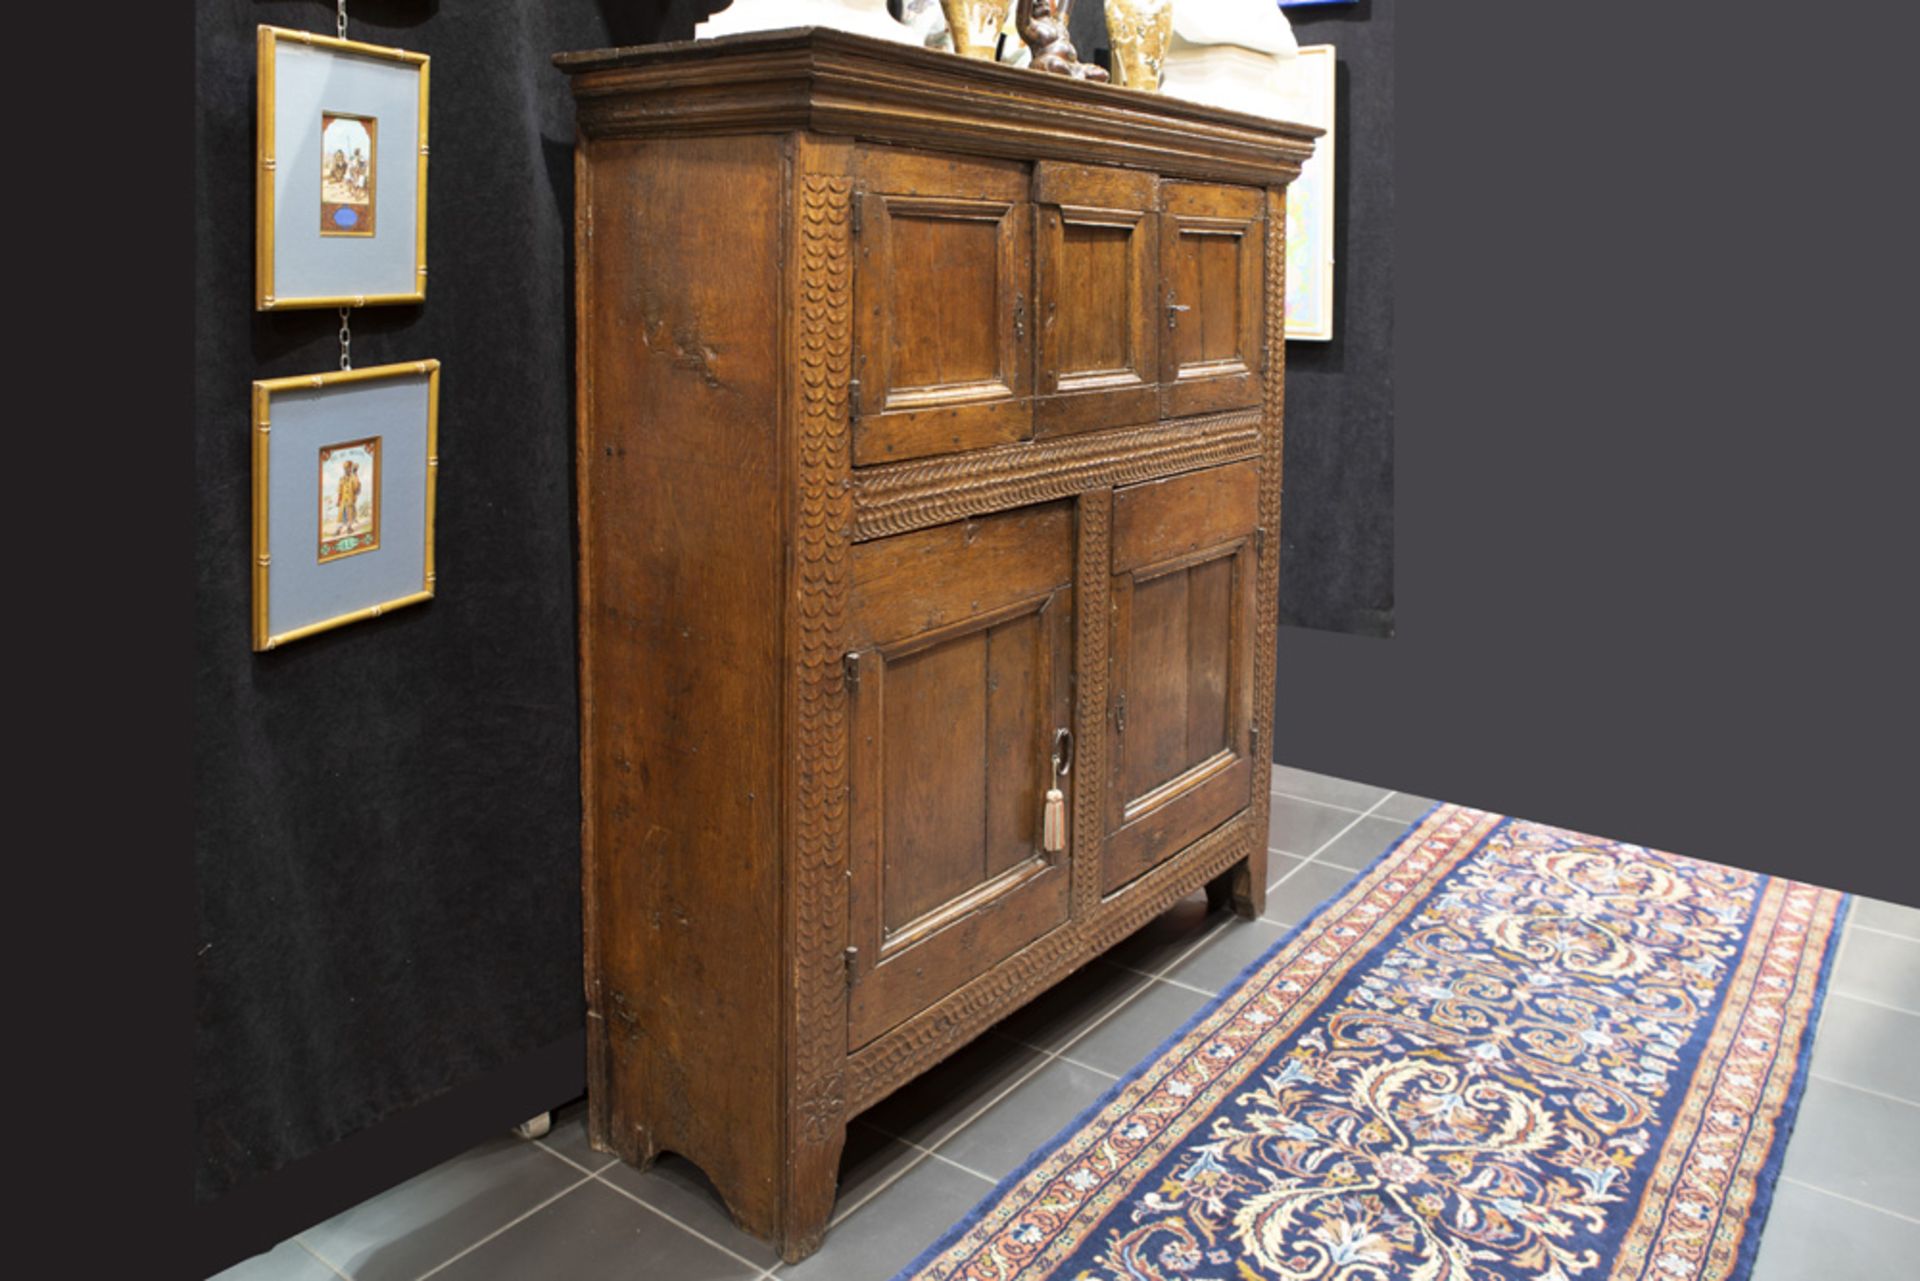 early 17th Cent. Renaissance stylefour doors cupboard in oak with a nice patina || Vroeg zeventiende